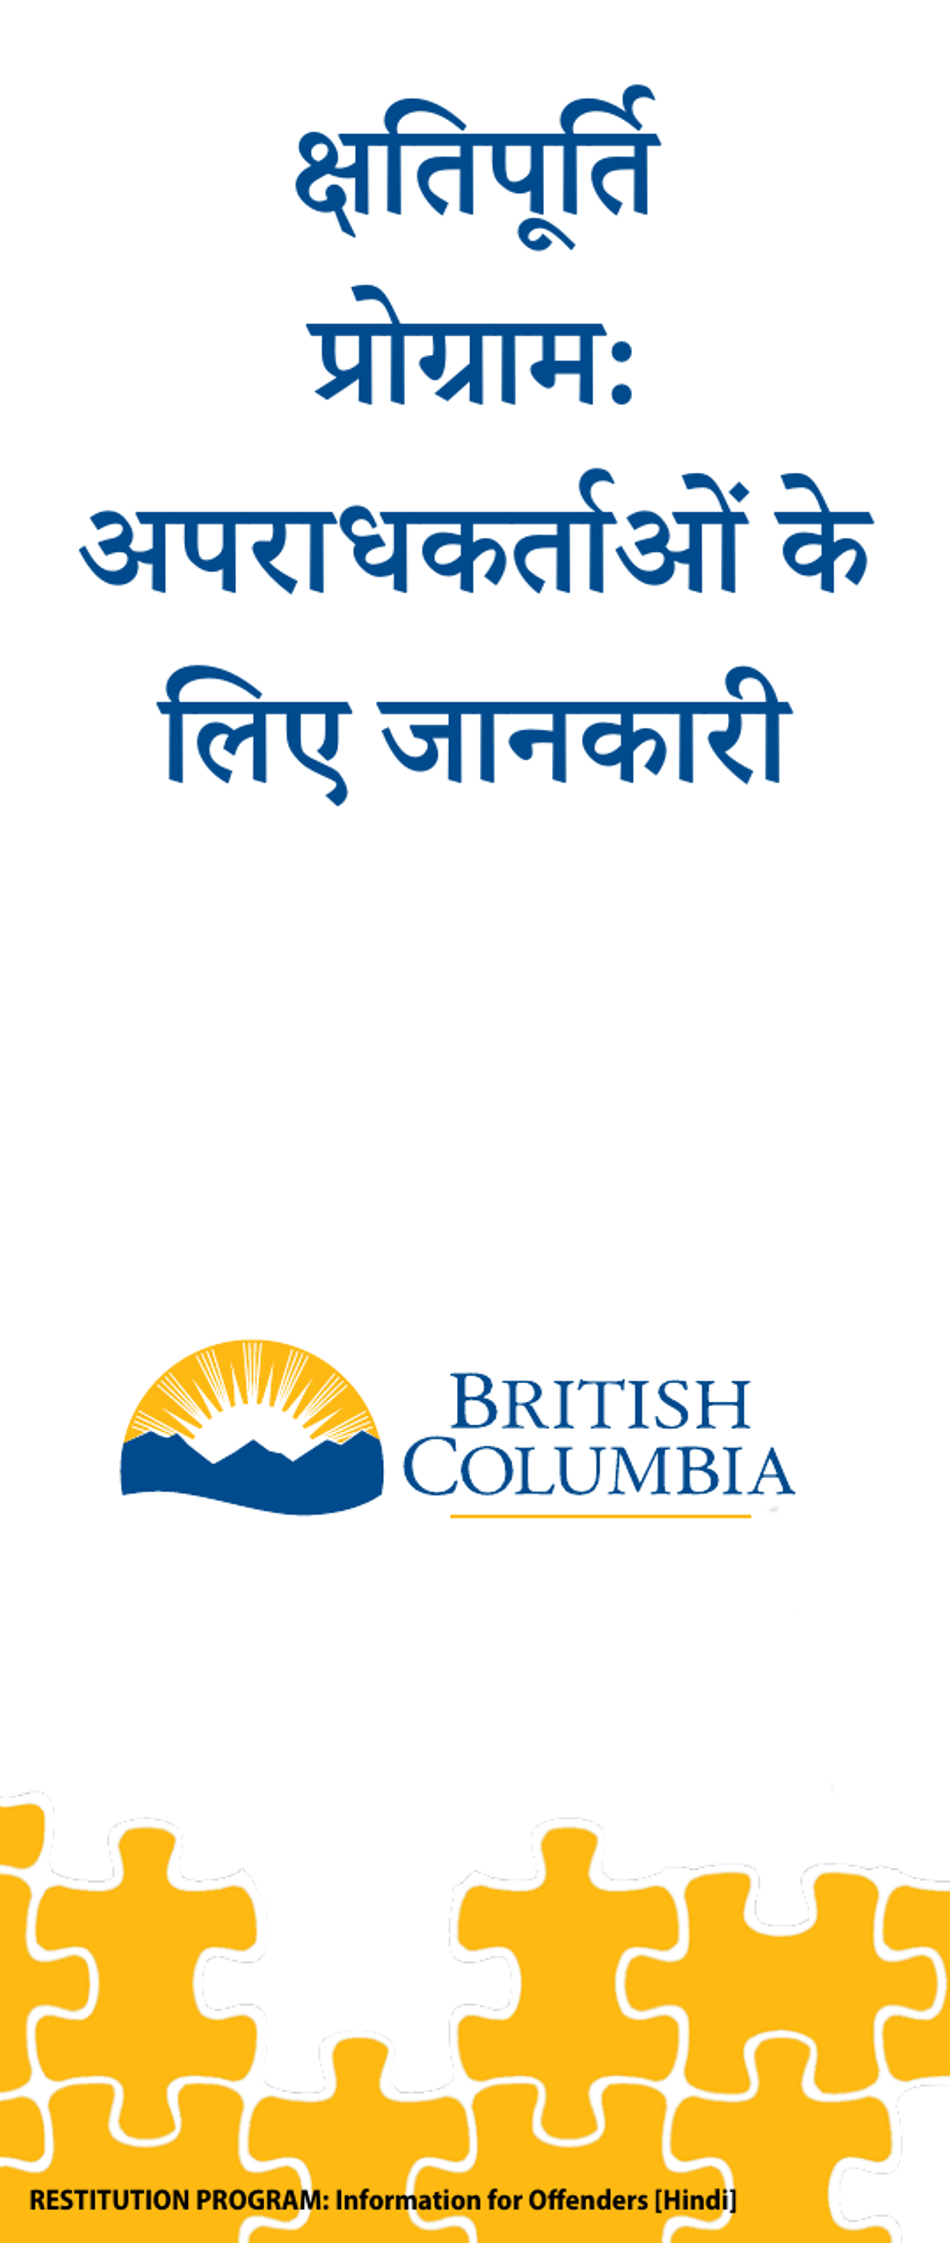 Restitution Program Application Form for Offenders - British Columbia, Canada (English / Hindi), Page 1